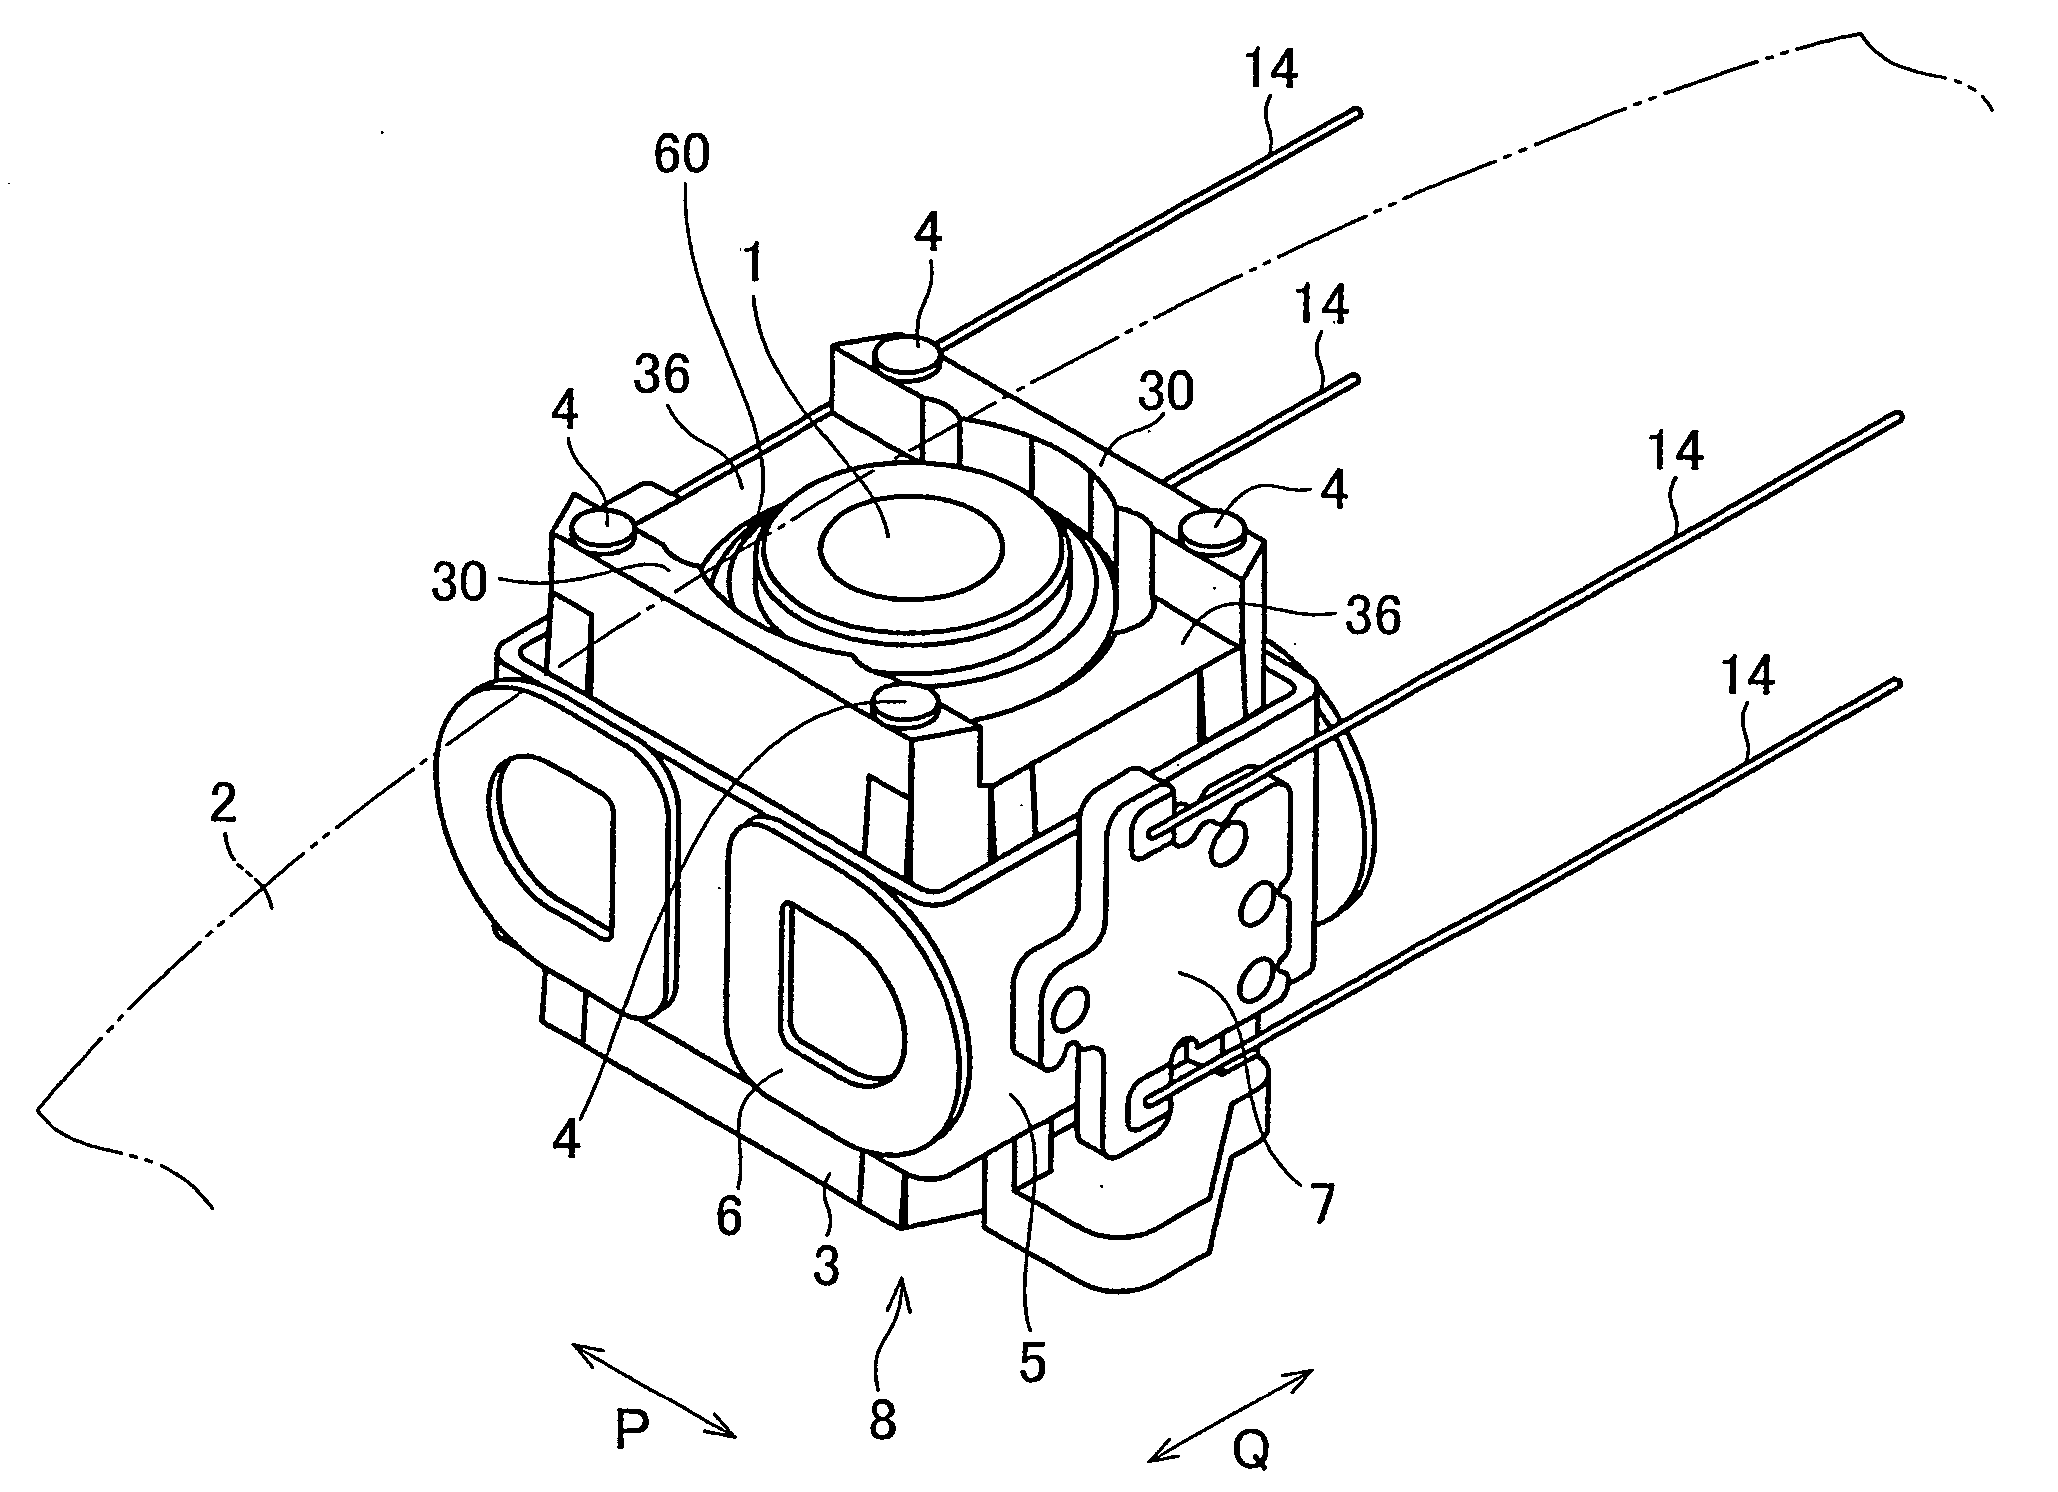 Objective lens holding device and usage thereof